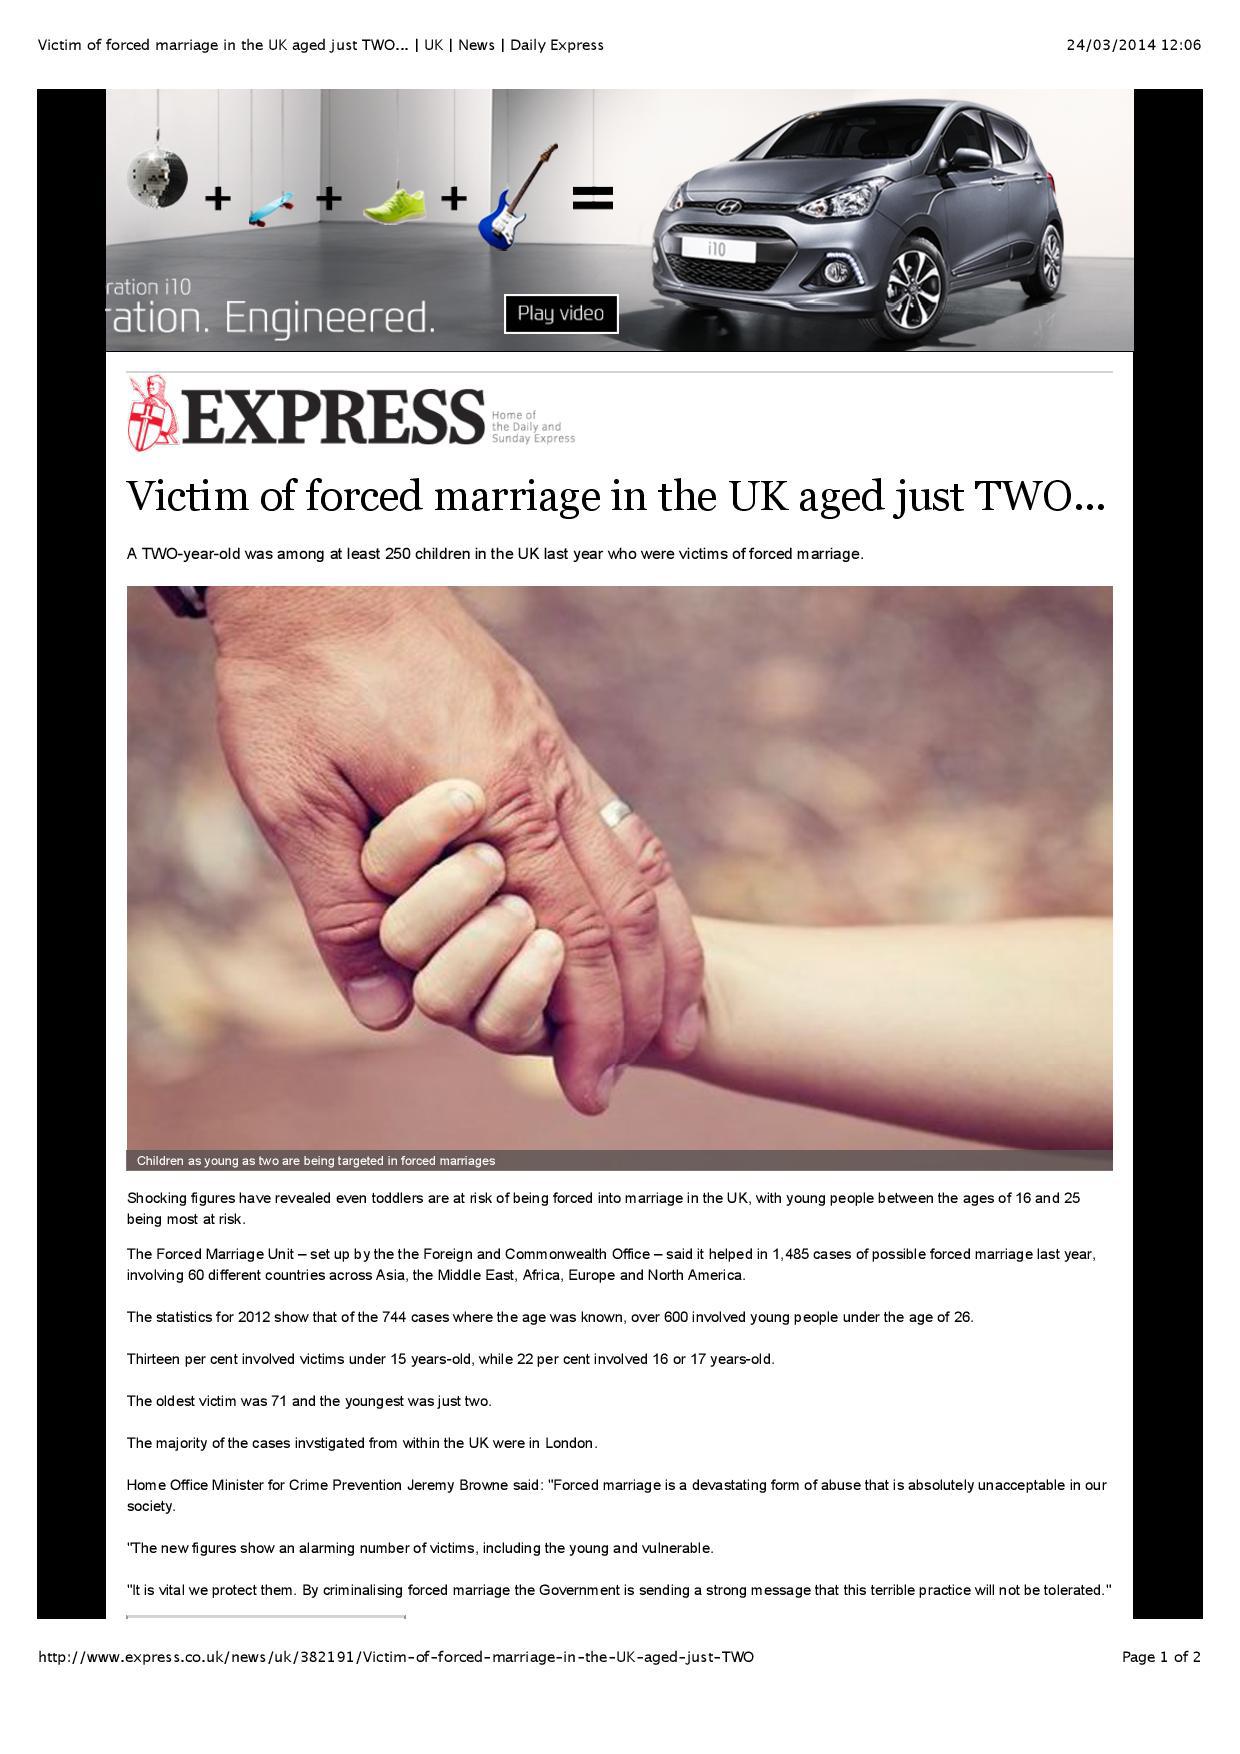 express-victim-of-forced-marriage-in-the-uk-aged-just-two-uk-news-daily-express-page-001